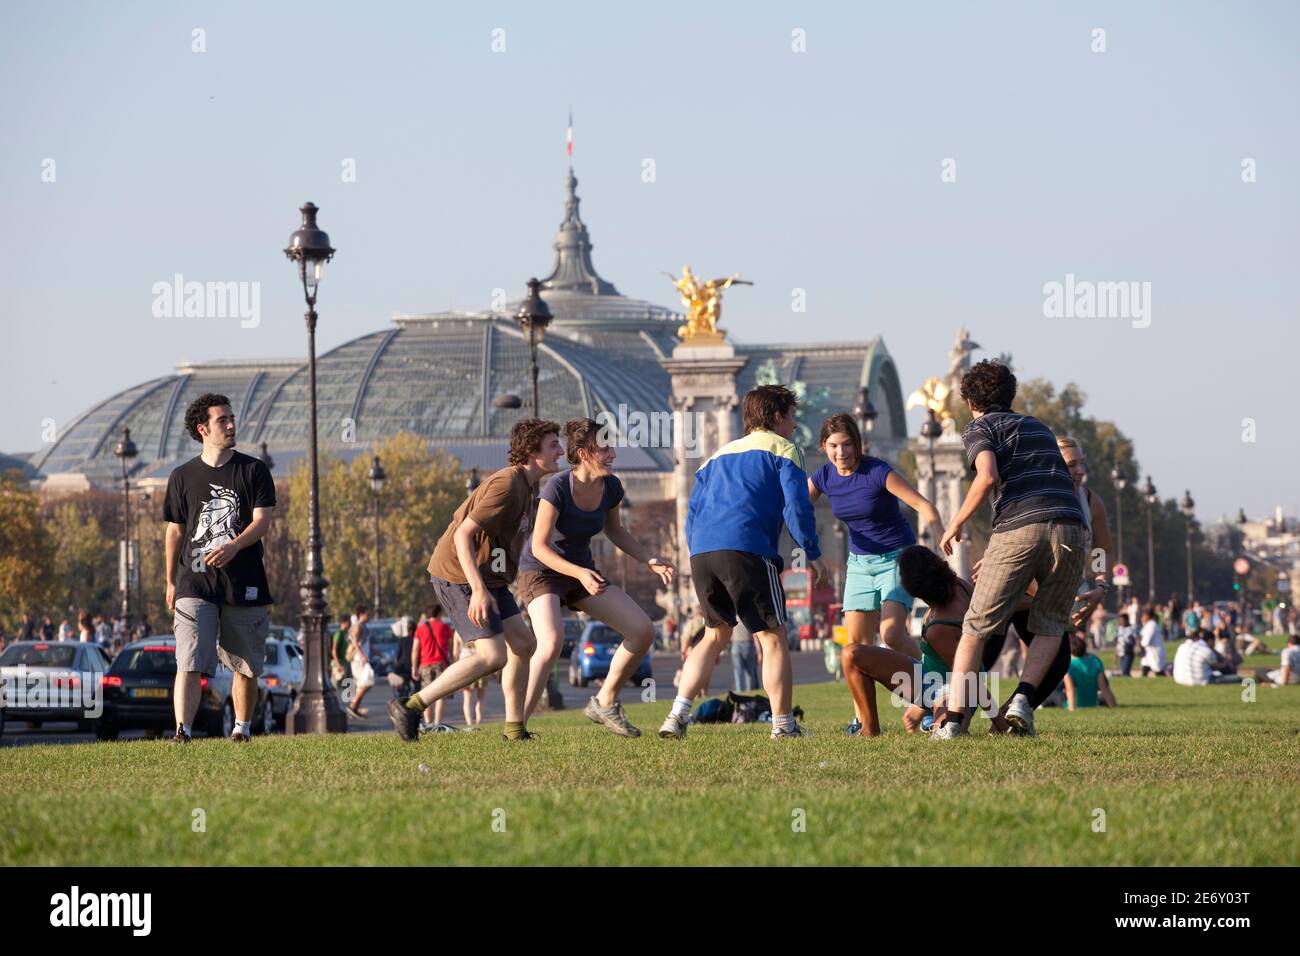 Young people on a lawn with the Grand Palais in the background. Stock Photo